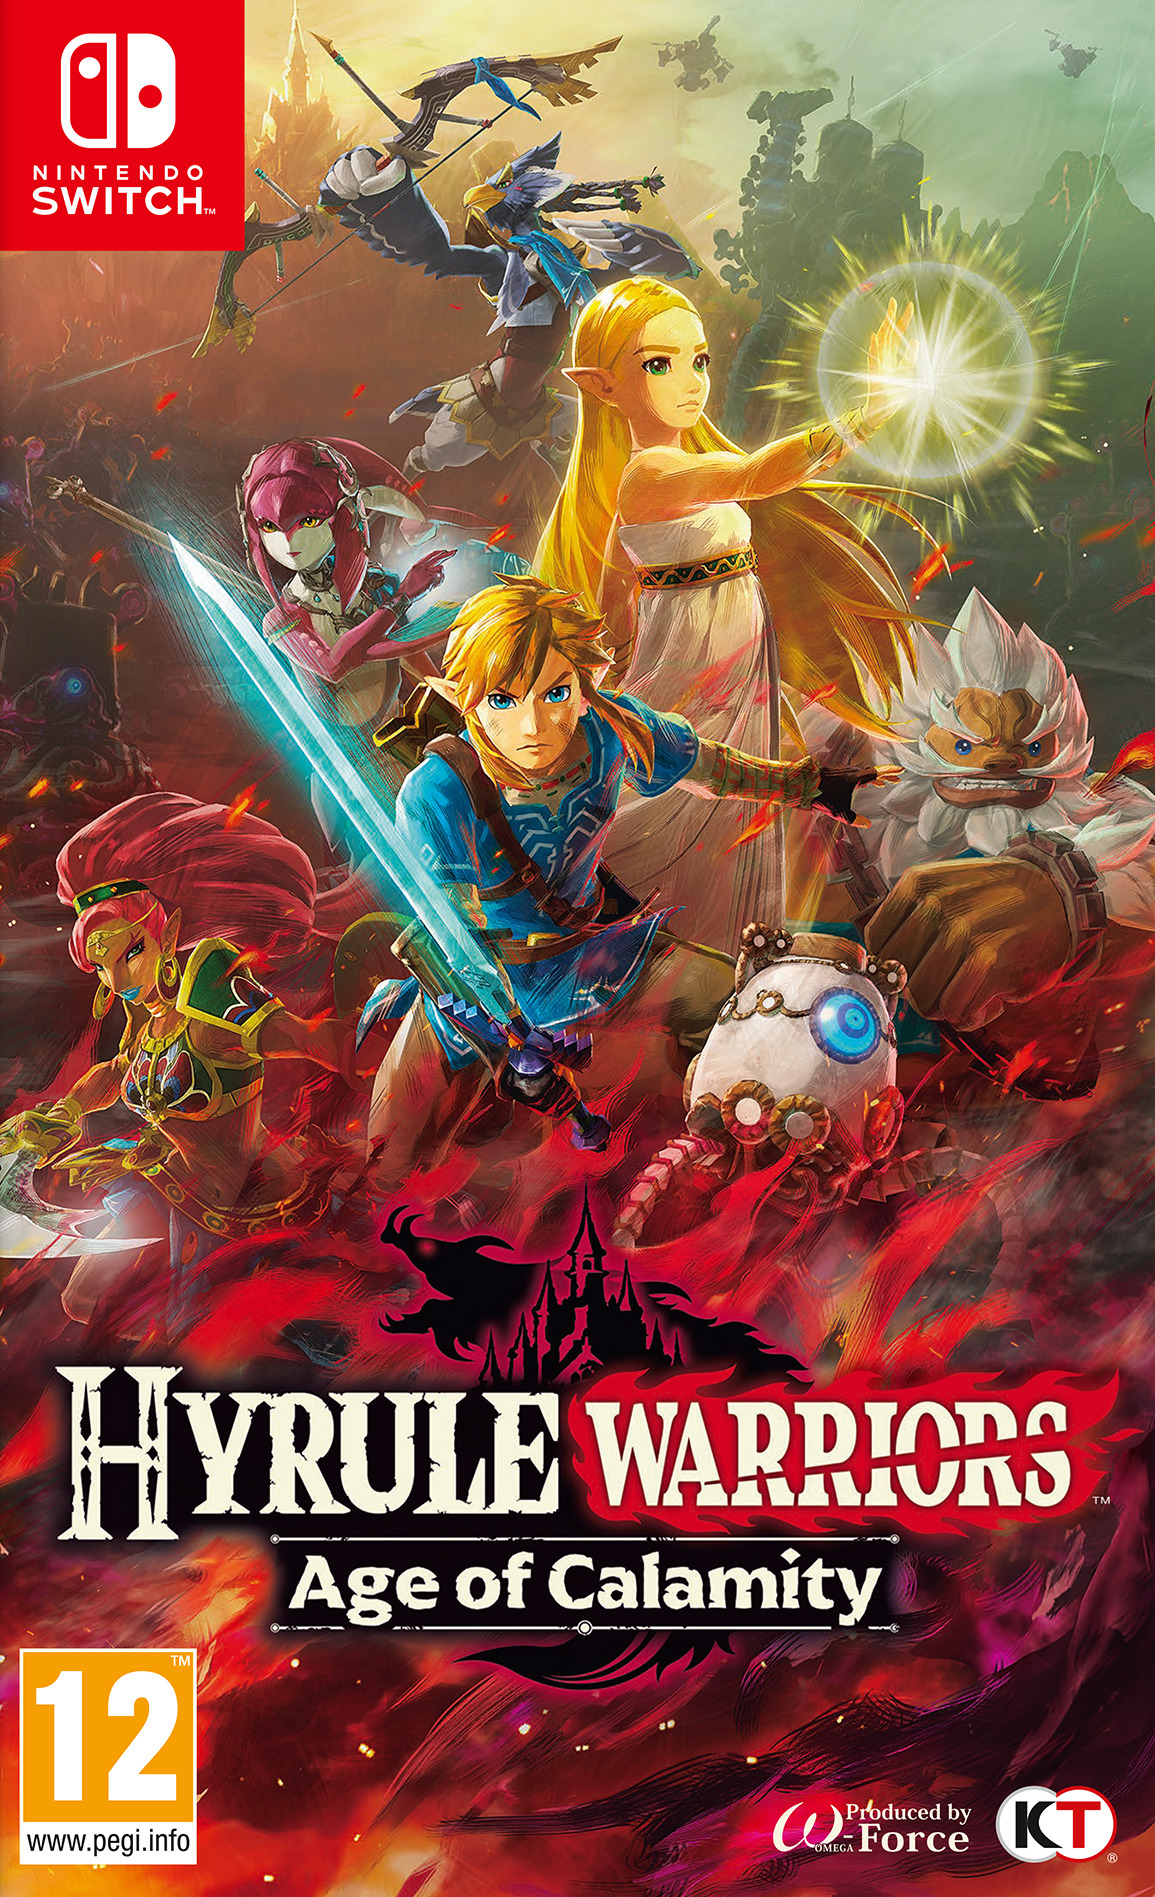 Hyrule Warriors: Age of Calamity (SWITCH)